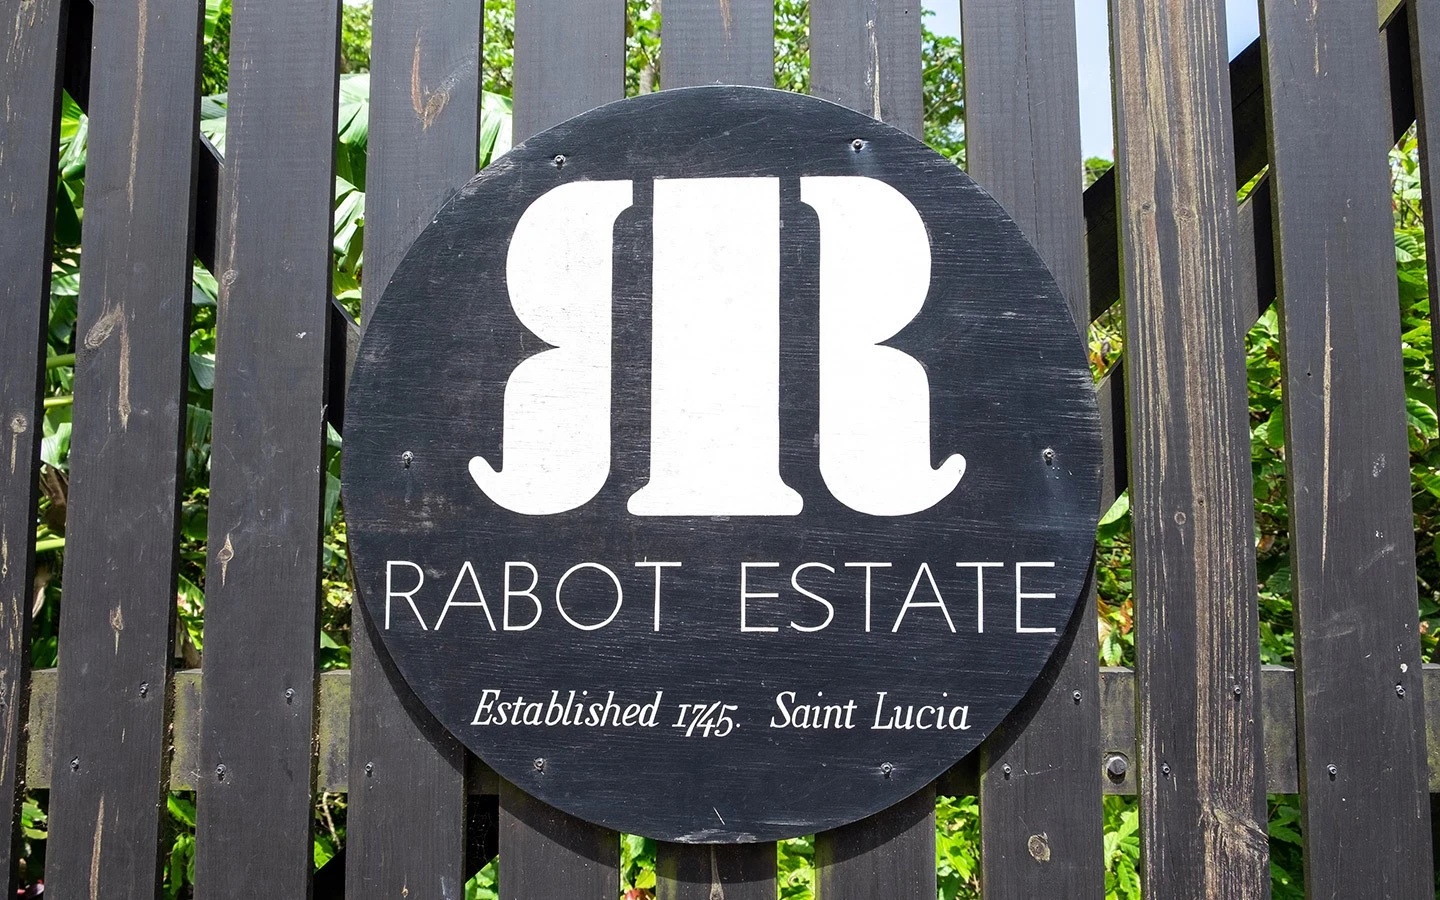 Rabot Estate chocolate makers in St Lucia